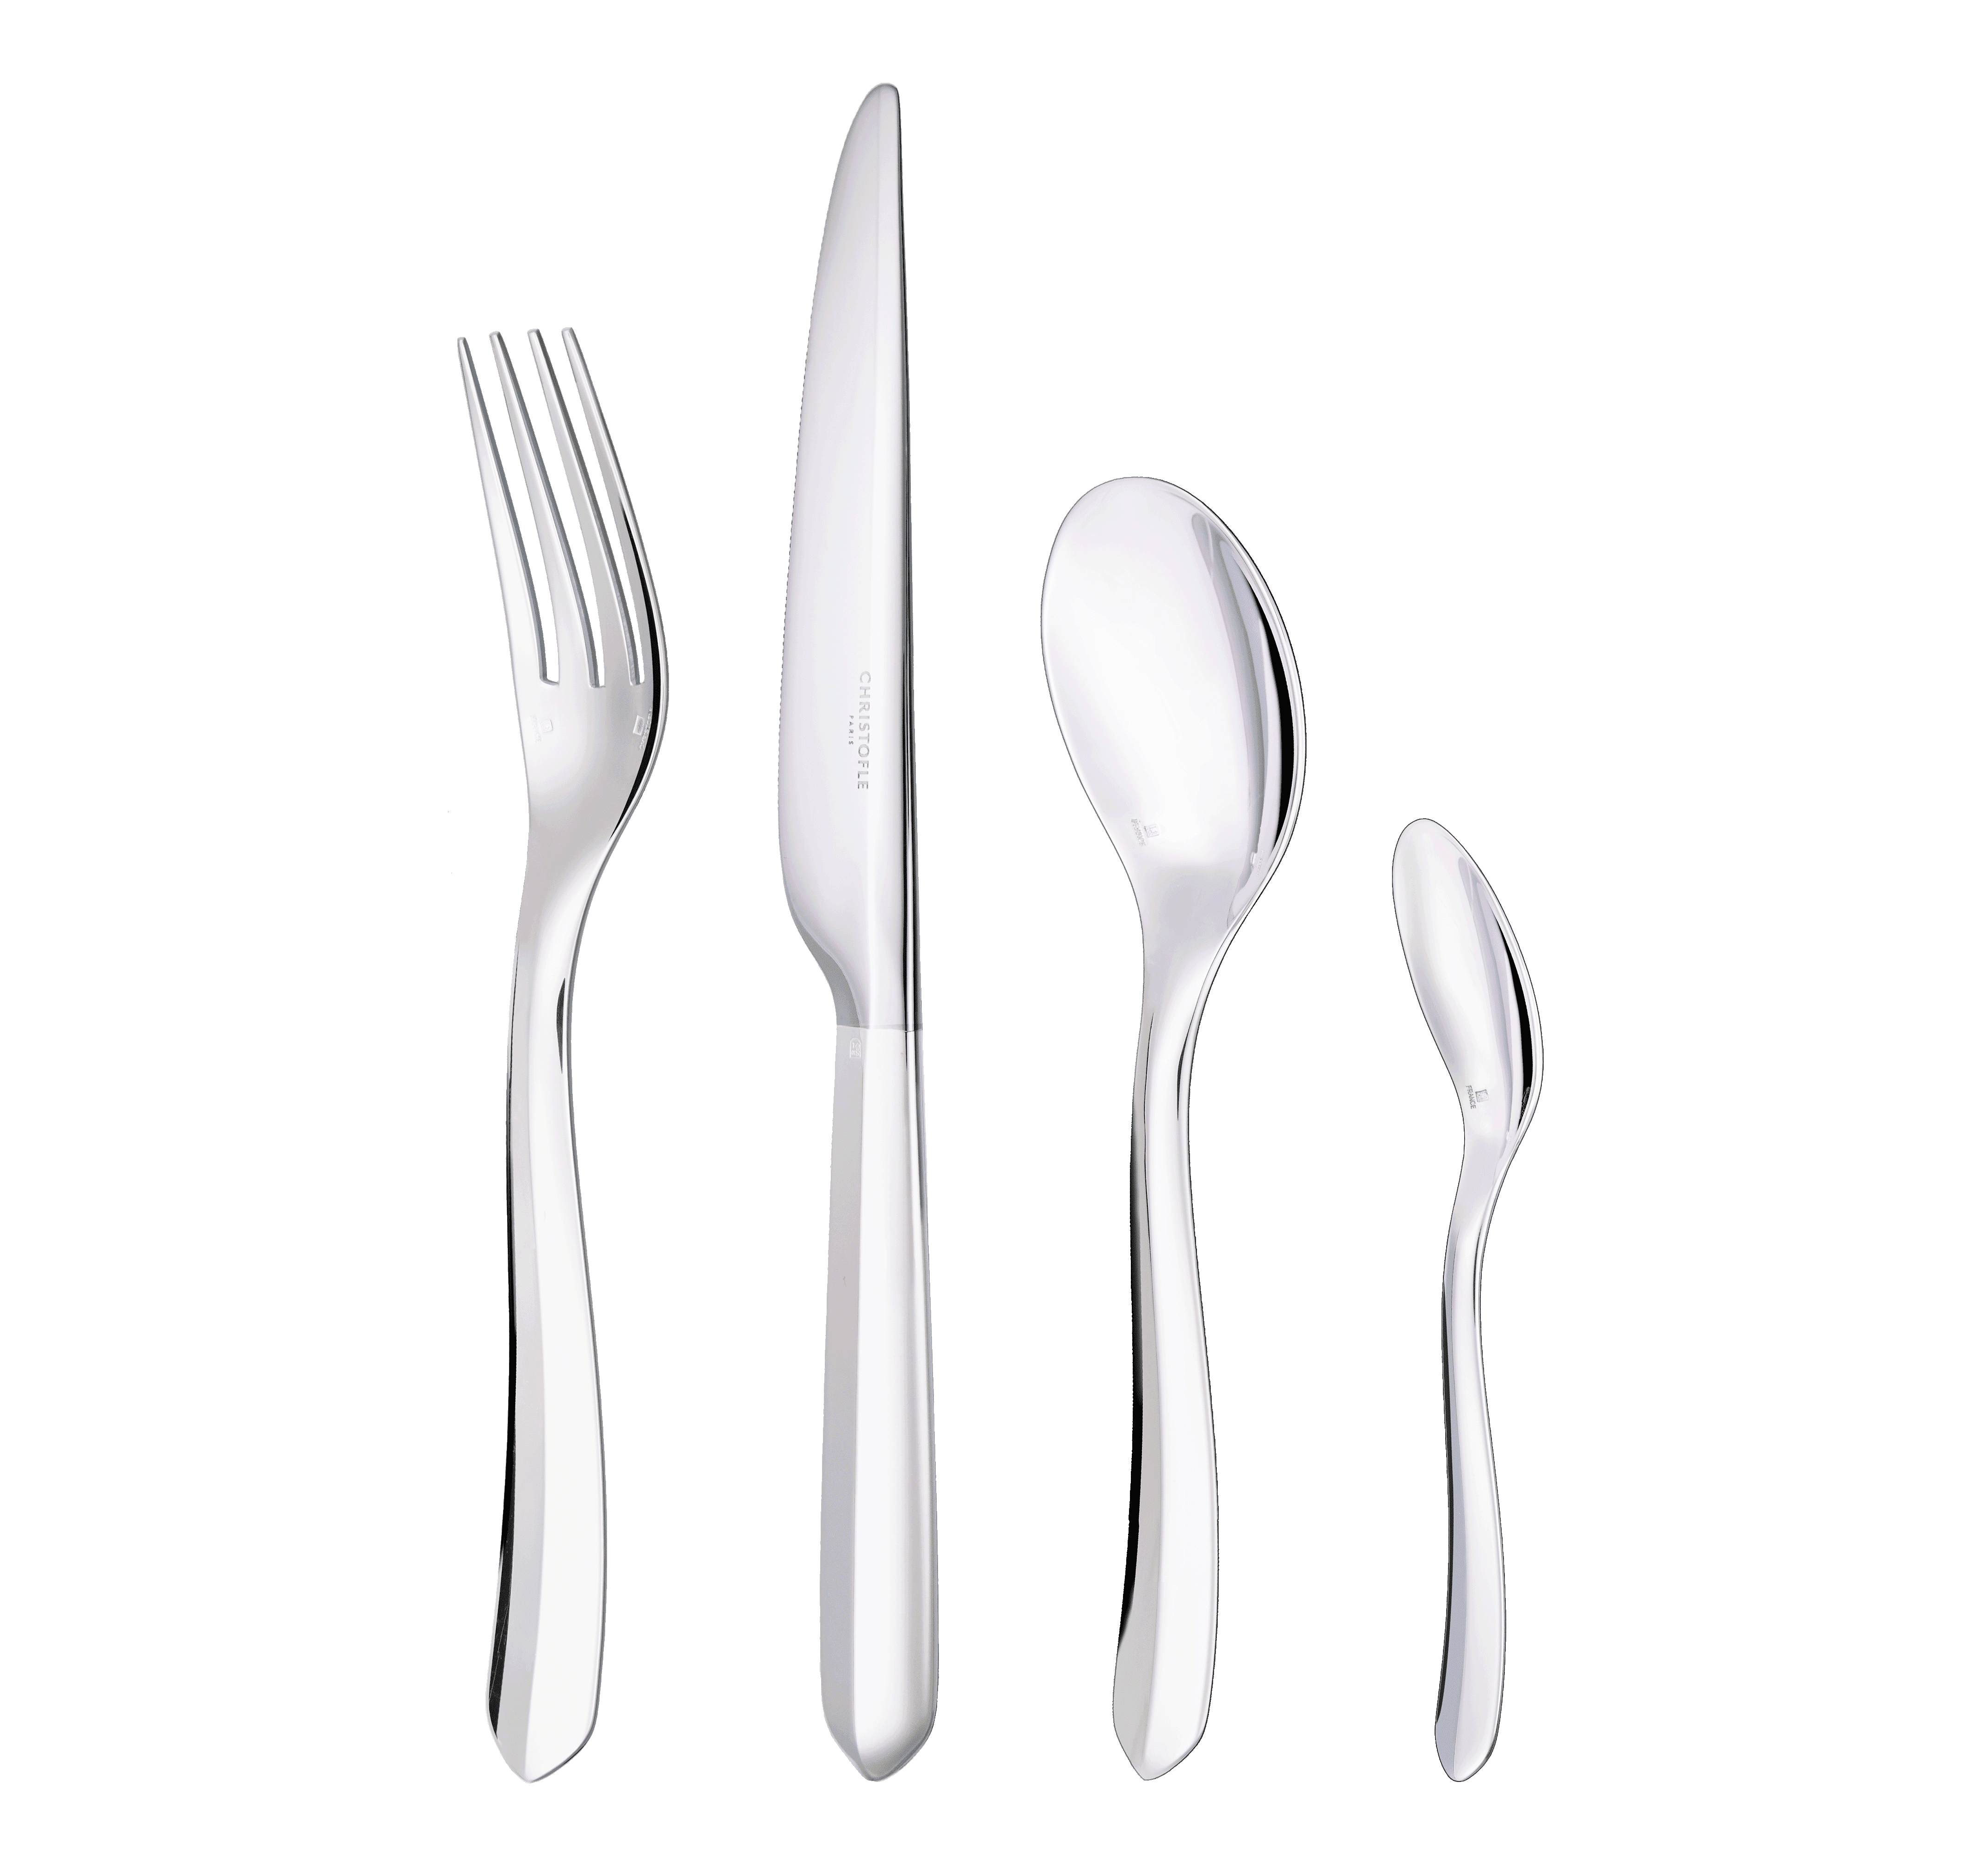 24-piece Silver-Plated Flatware Set for 6 People with Small 